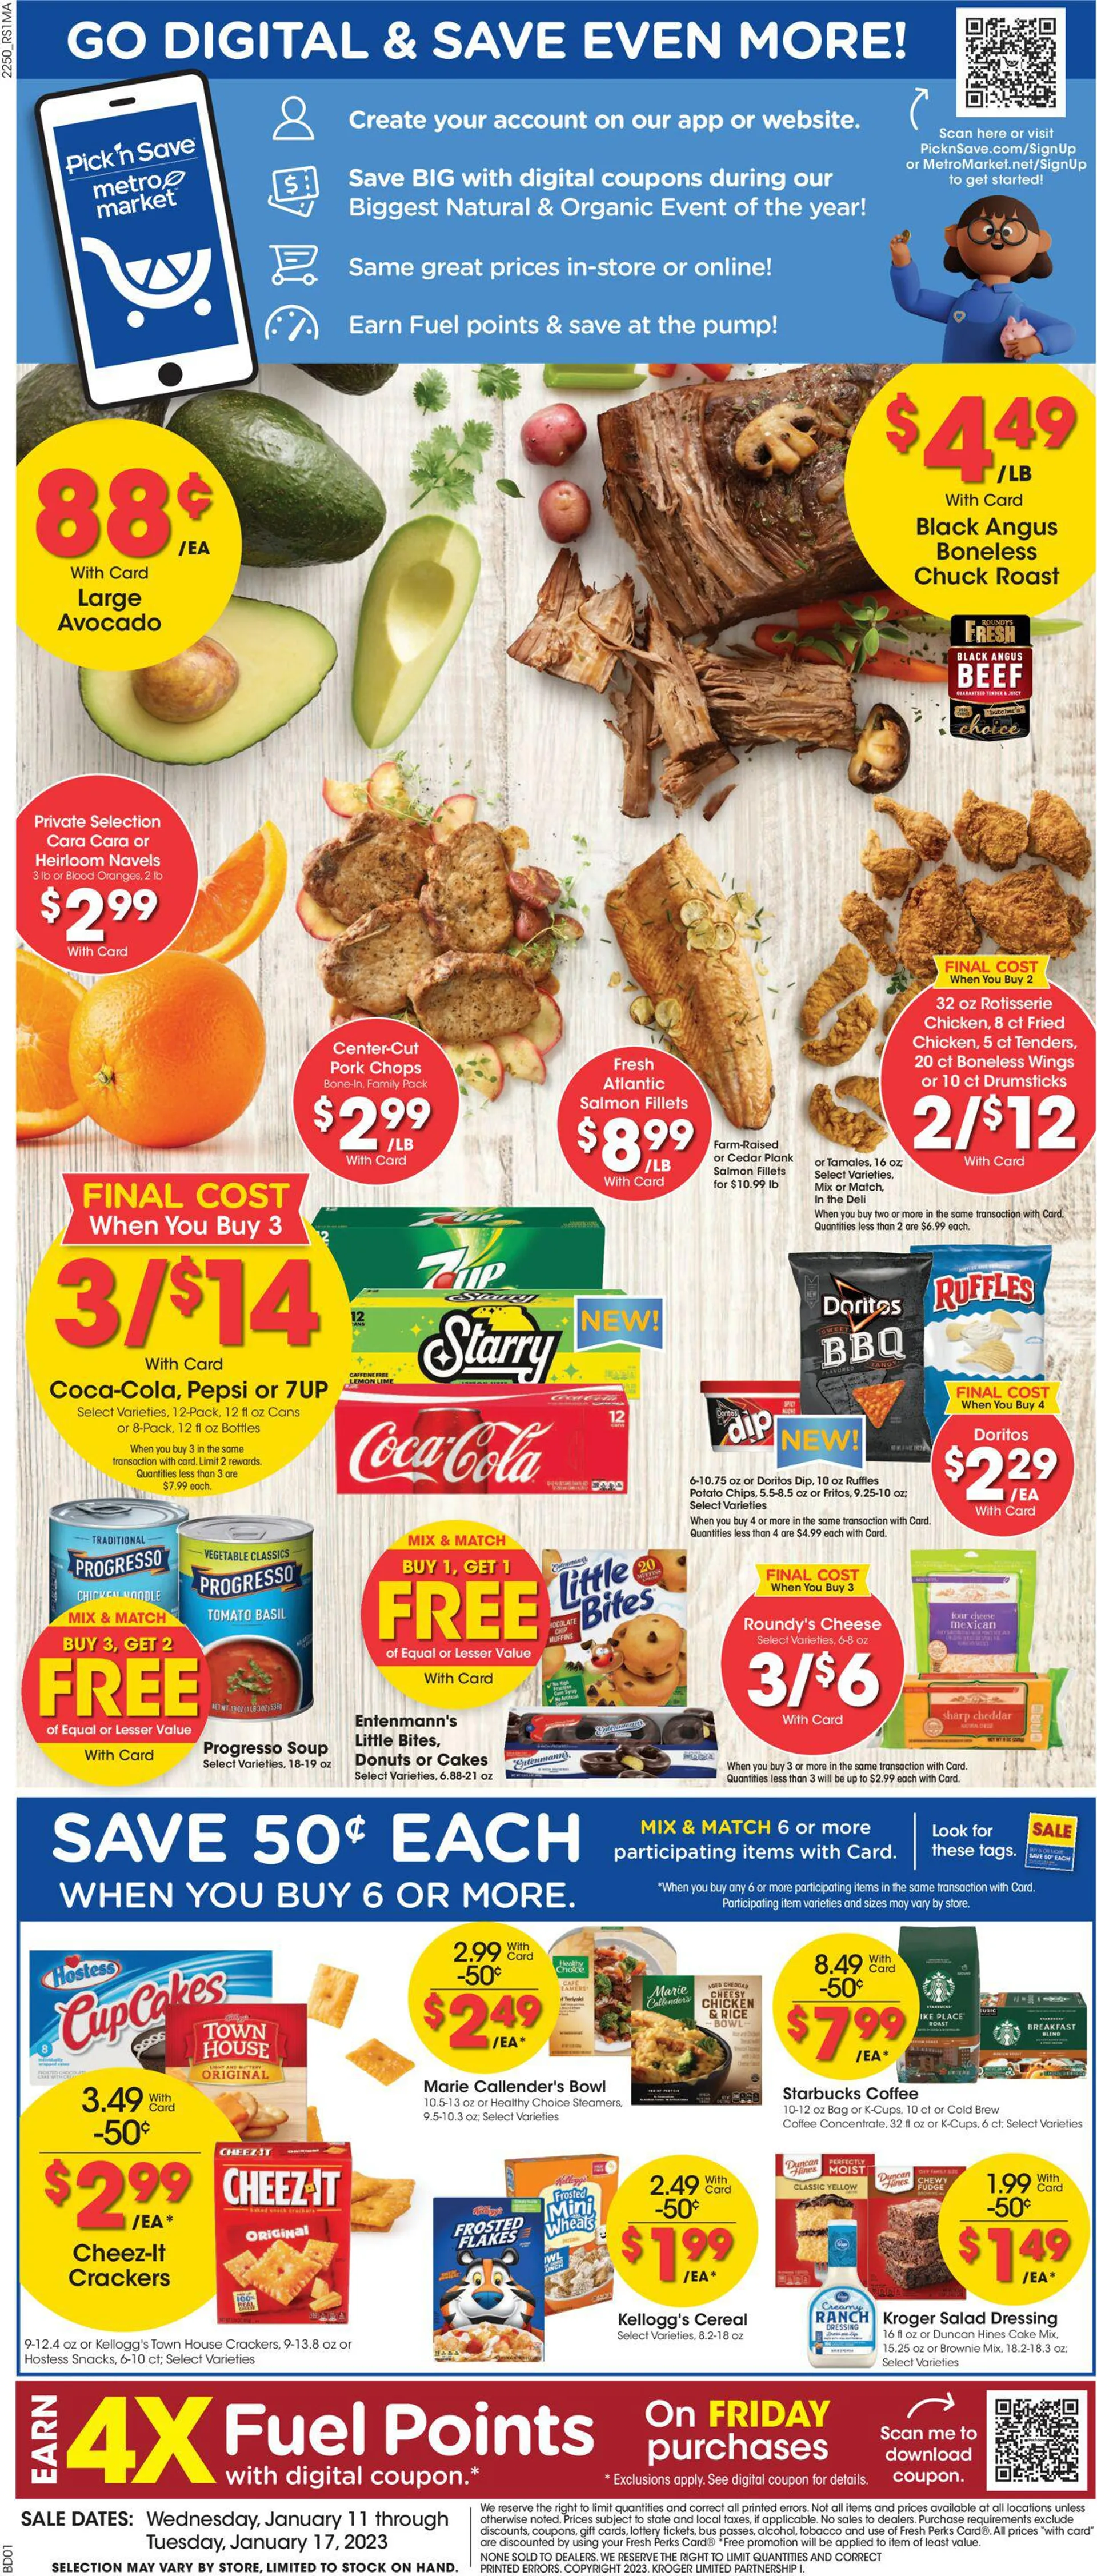 Metro Market Current weekly ad - 1